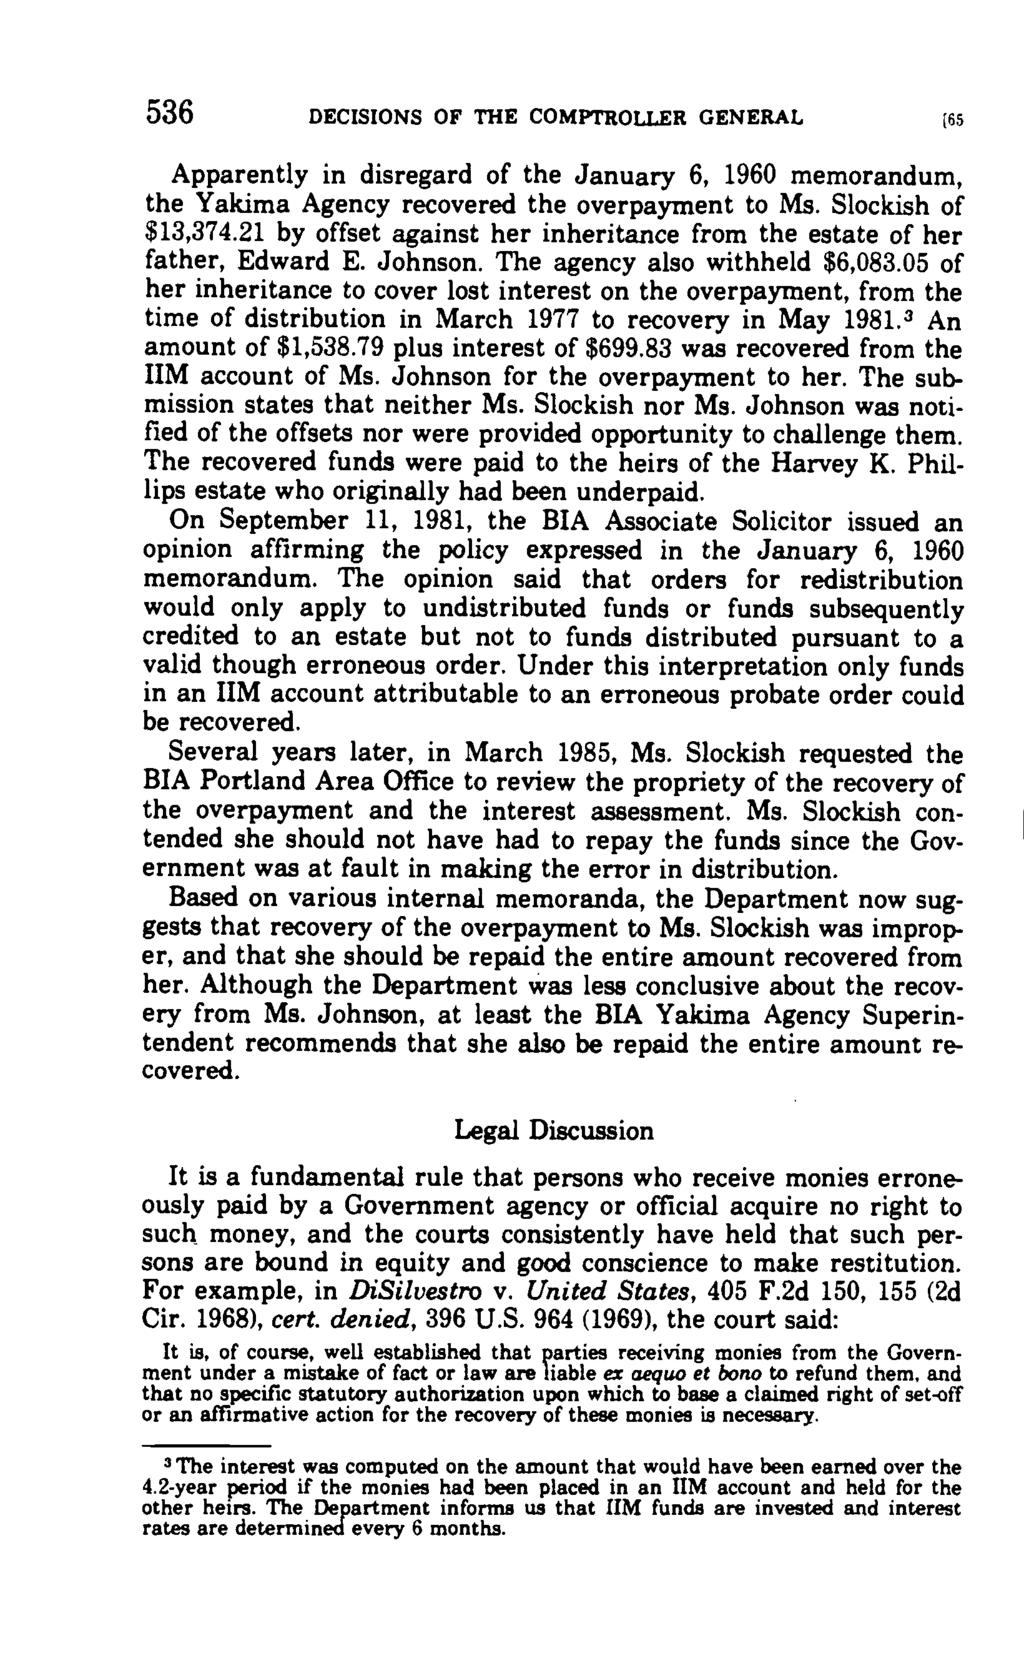 536 DECISIONS OF THE COMPTROLLER GENERAL Apparently in disregard of the January 6, 1960 memorandum, the Yakima Agency recovered the overpayment to Ms. Slockish of $13,374.